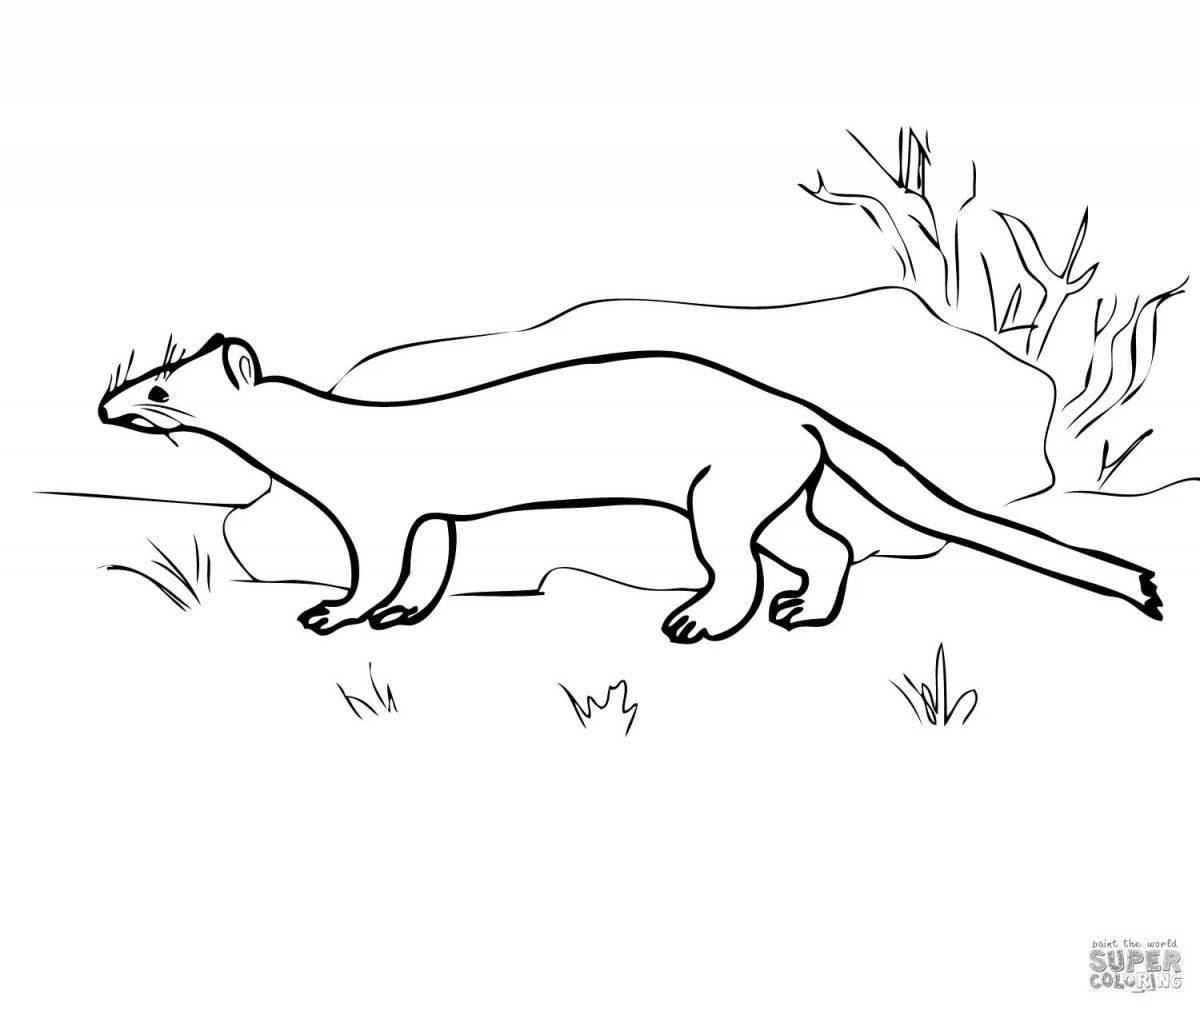 Colorful stoat coloring page for kids